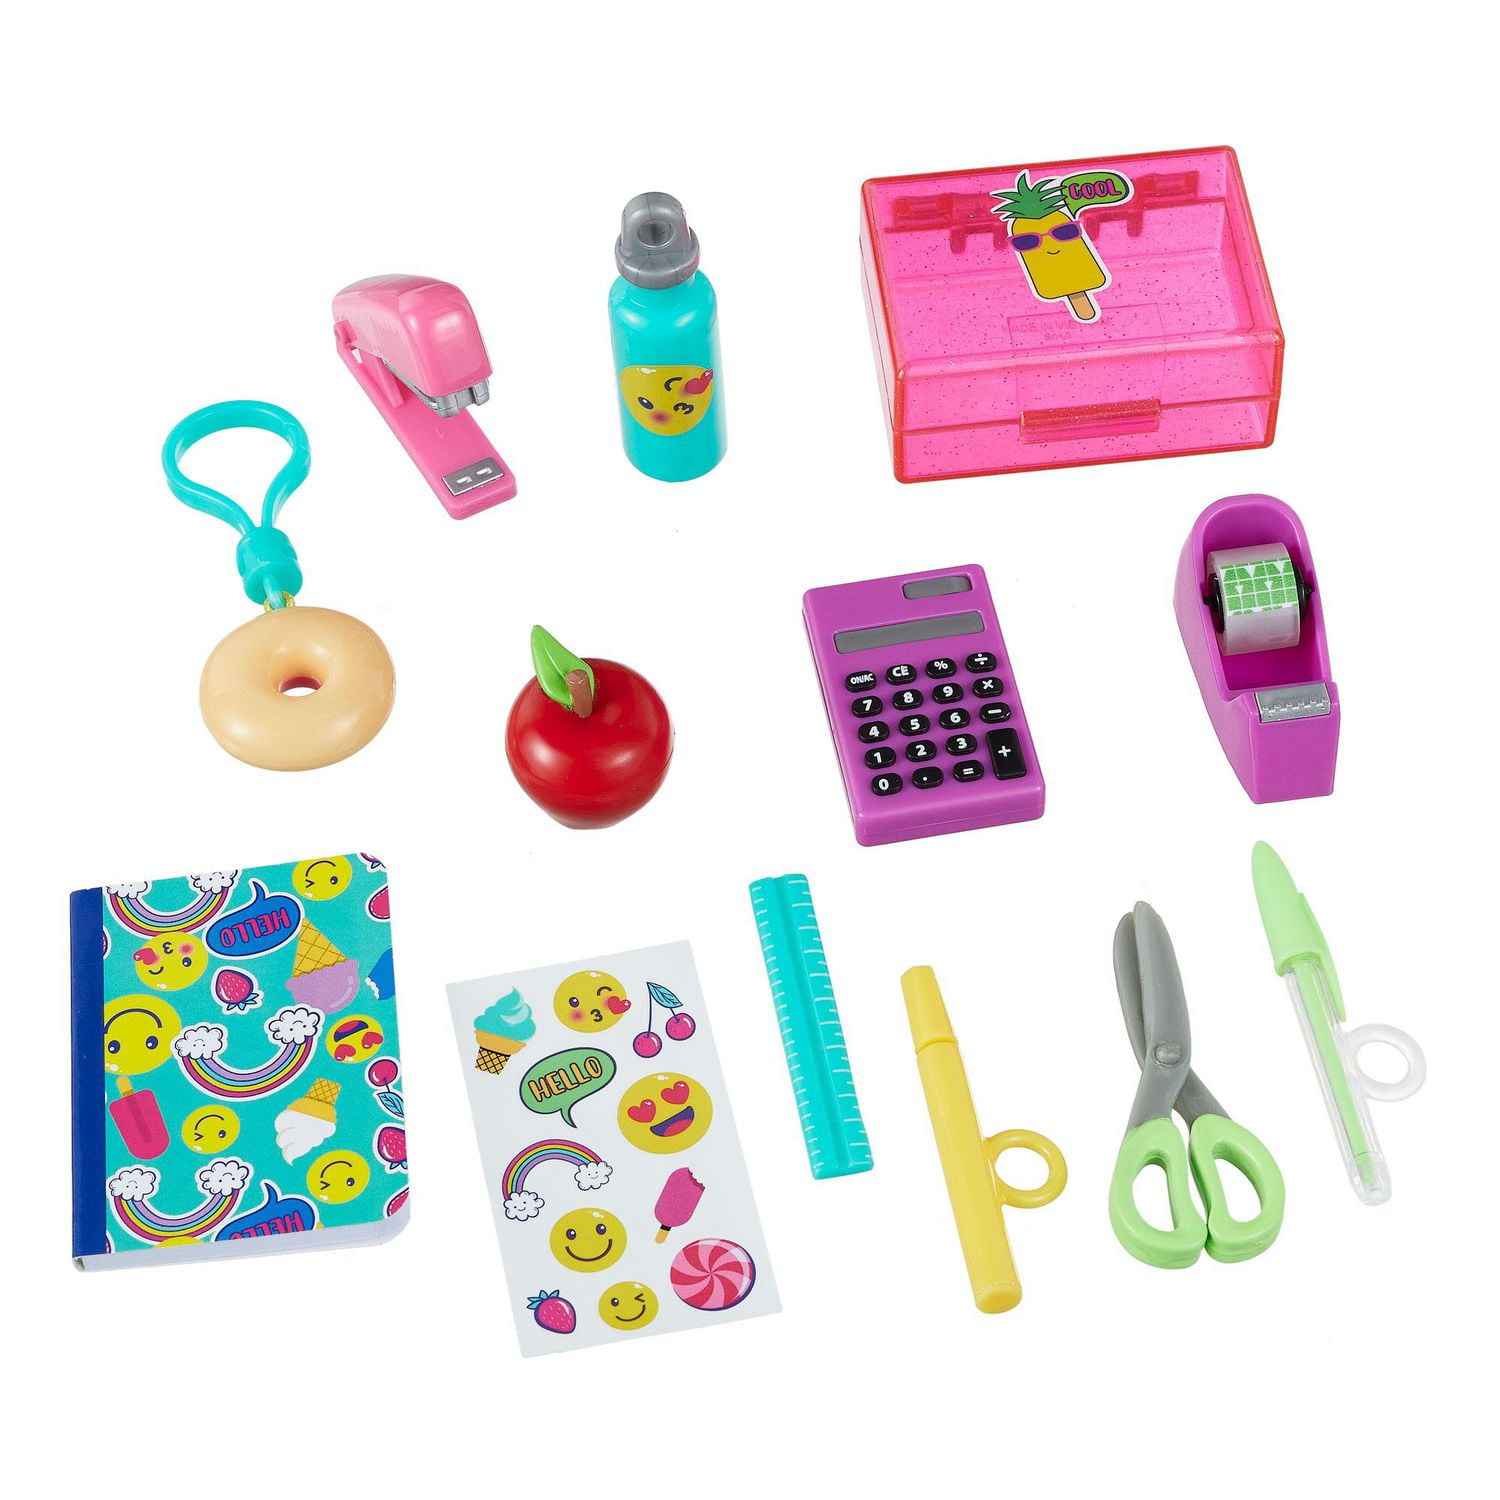 My Life As School Accessories Play Set For 18 Dolls